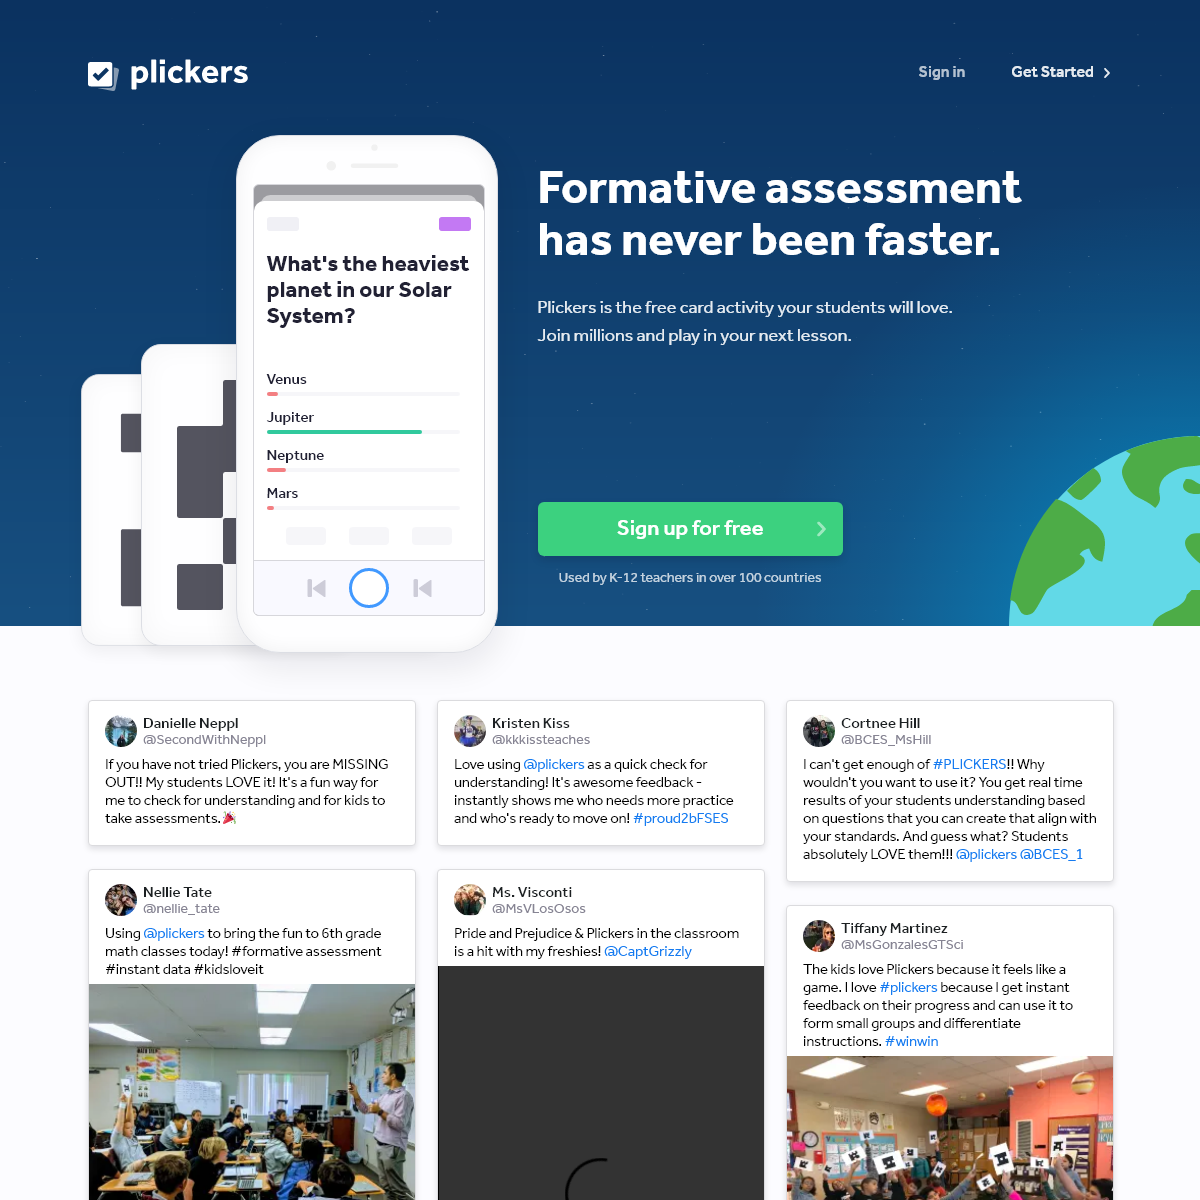 A complete backup of plickers.com